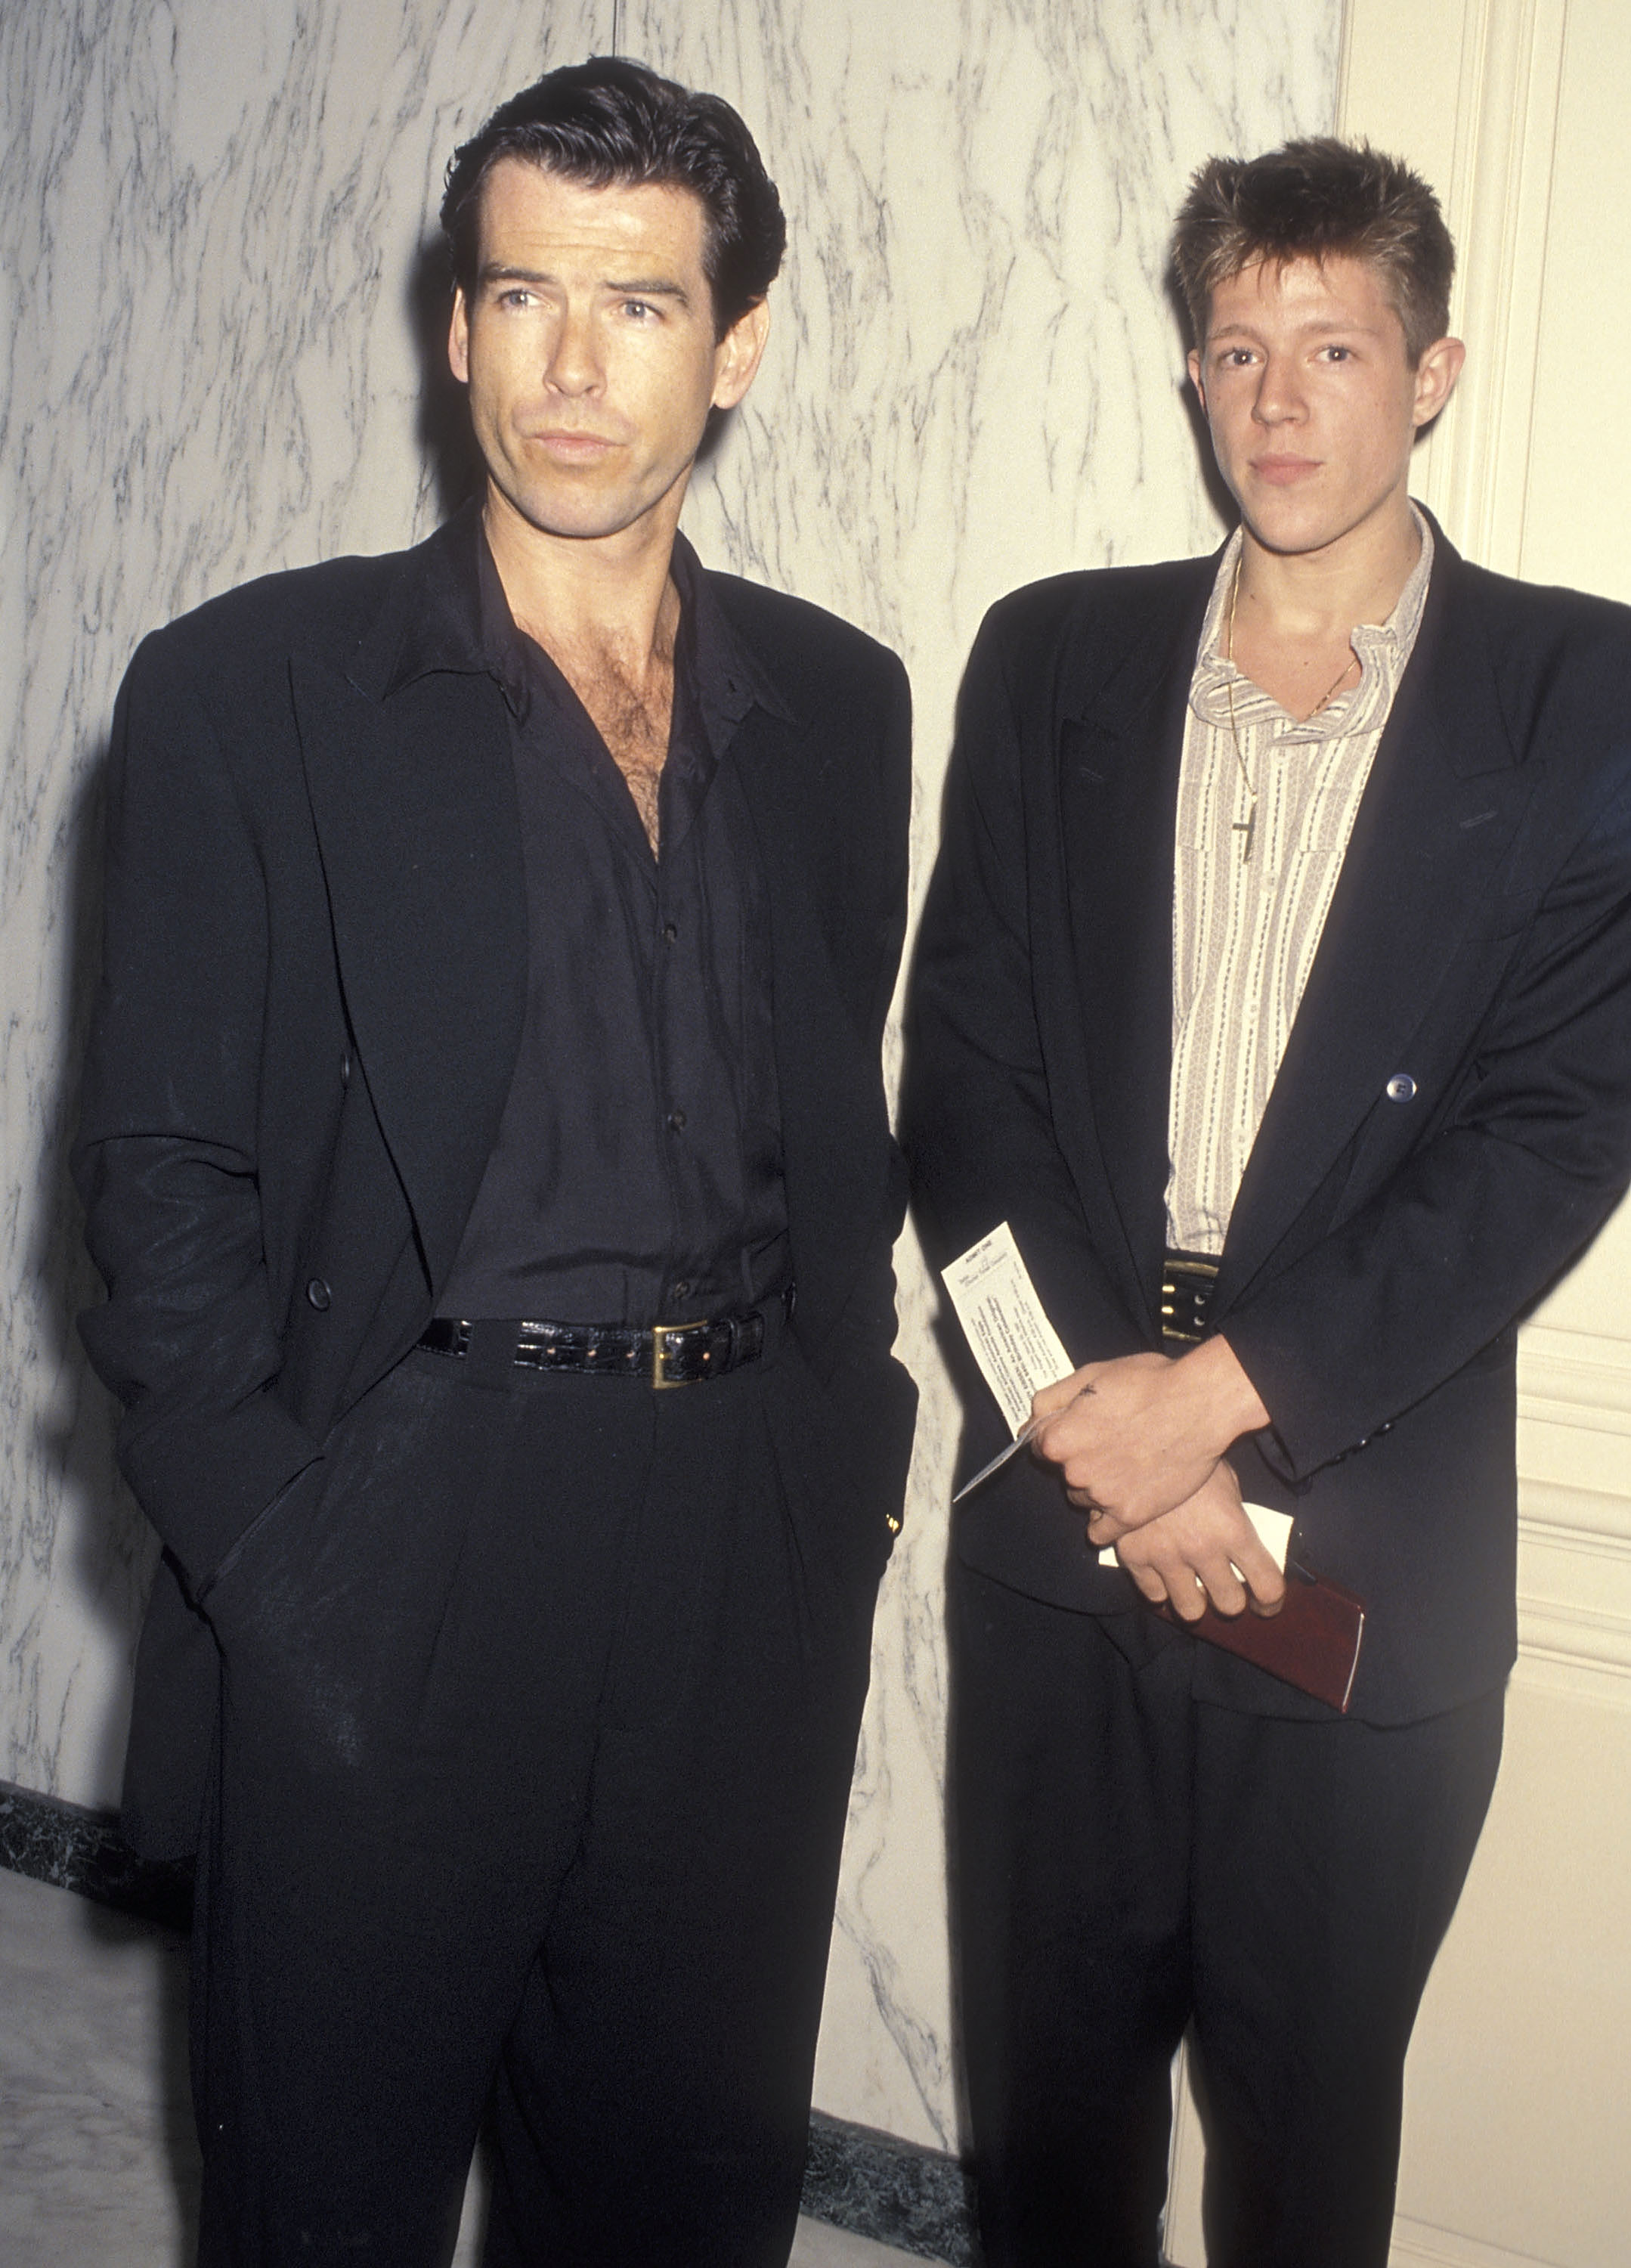 Pierce Brosnan and Christopher Brosnan during American Cinema Awards Foundation's 84th Birthday Celebration at Beverly Wilshire Hotel on March 20, 1992 in Beverly Hills, California. | Source: Getty Images